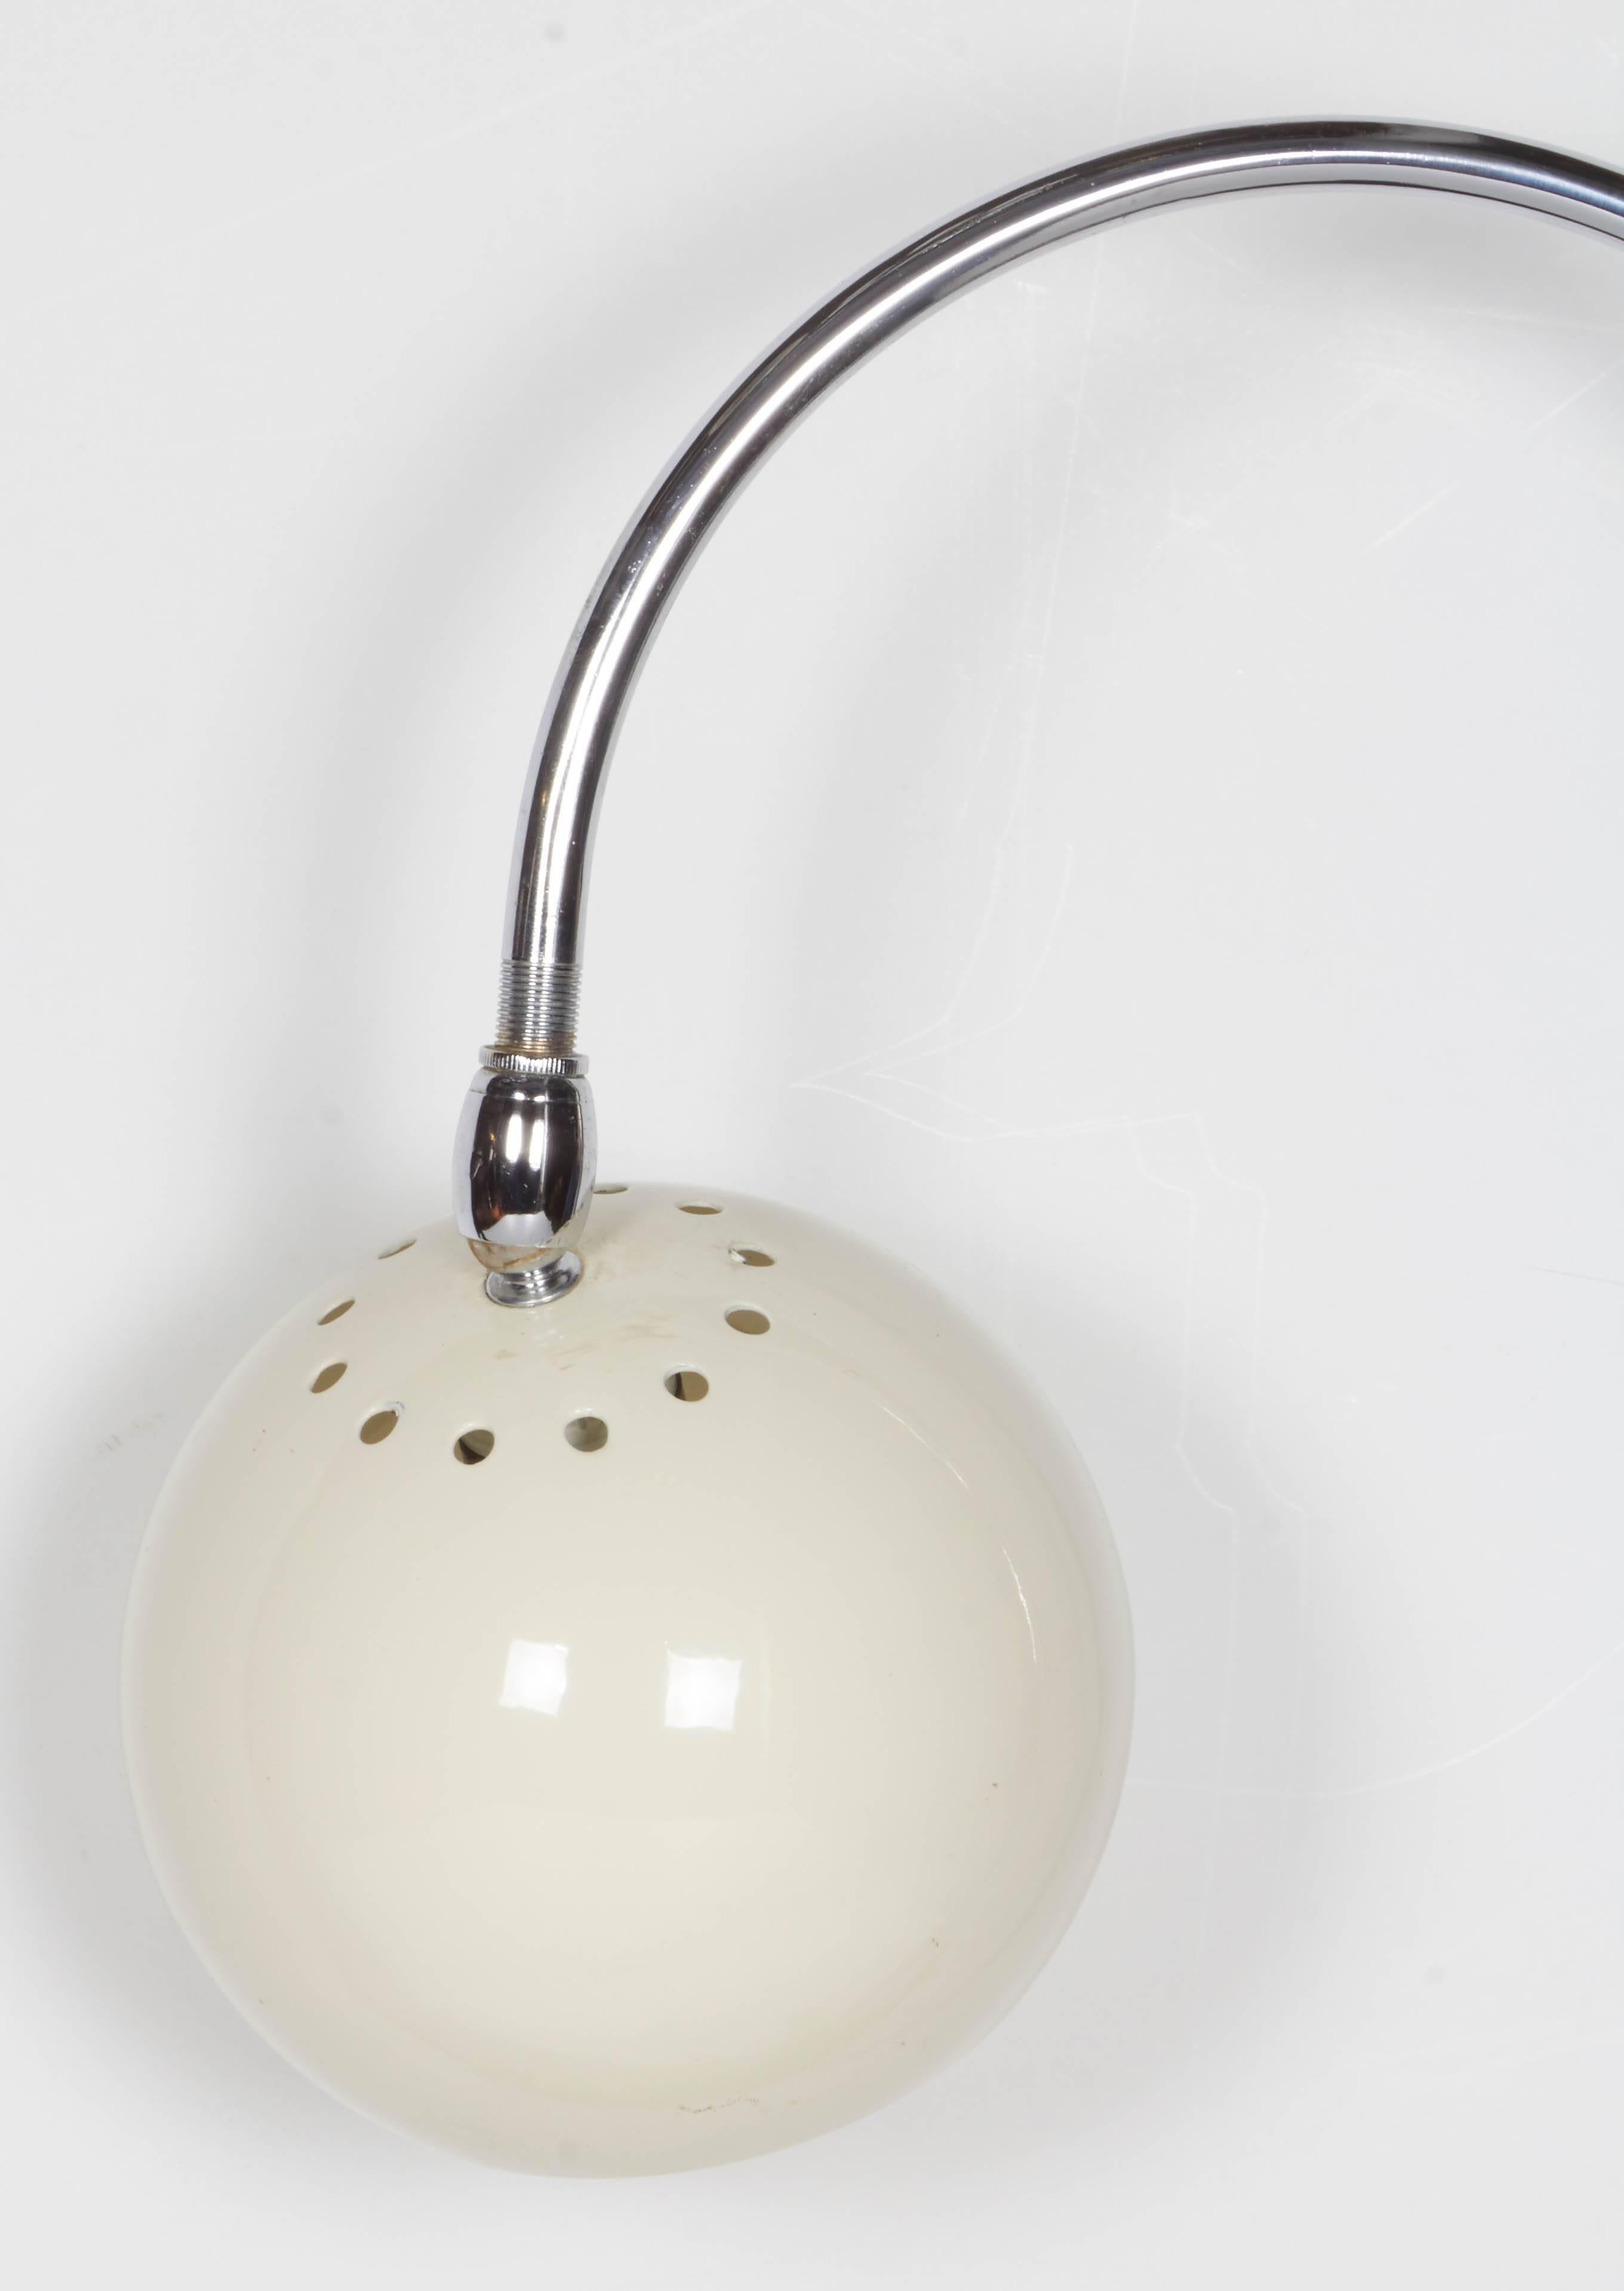 A fun piece of 1970s Italian mod design lighting. An off-white enamel globe is suspended from a chromed goose neck rod that has a black plastic screw on table or desk attachment. Requires on candelabra bulb. Rewired. Measures 10 inches wide and 22